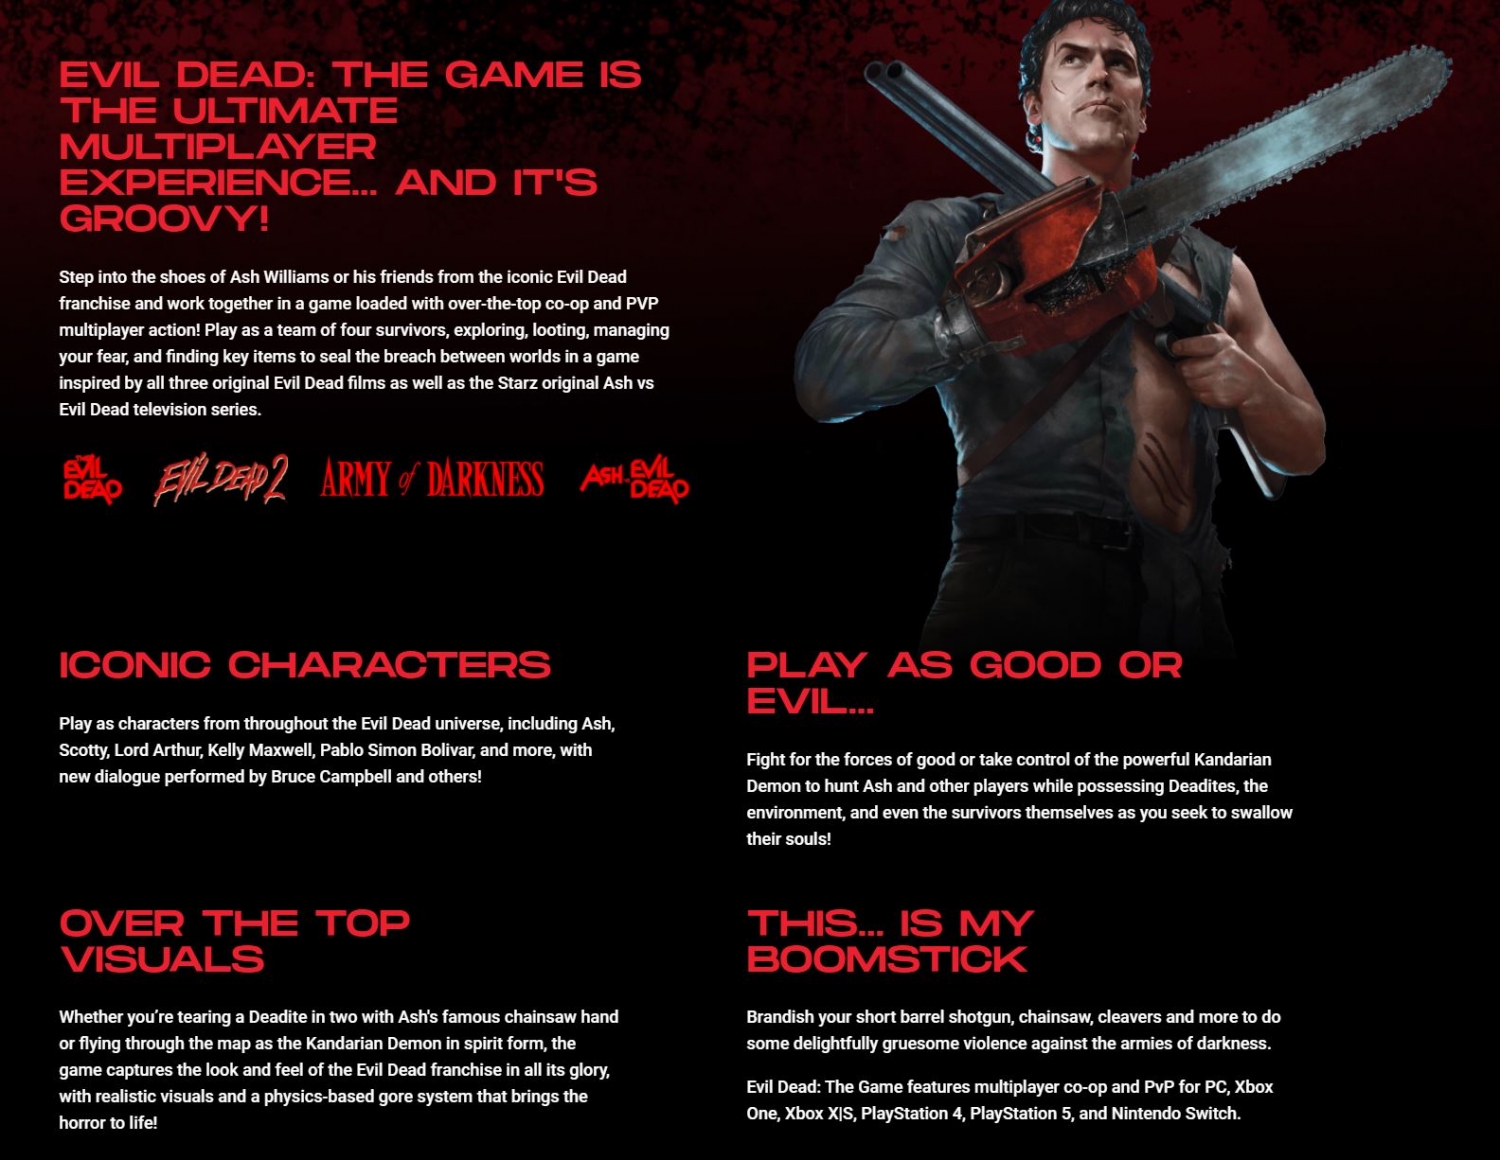 Evil Dead: The Game for PlayStation 5